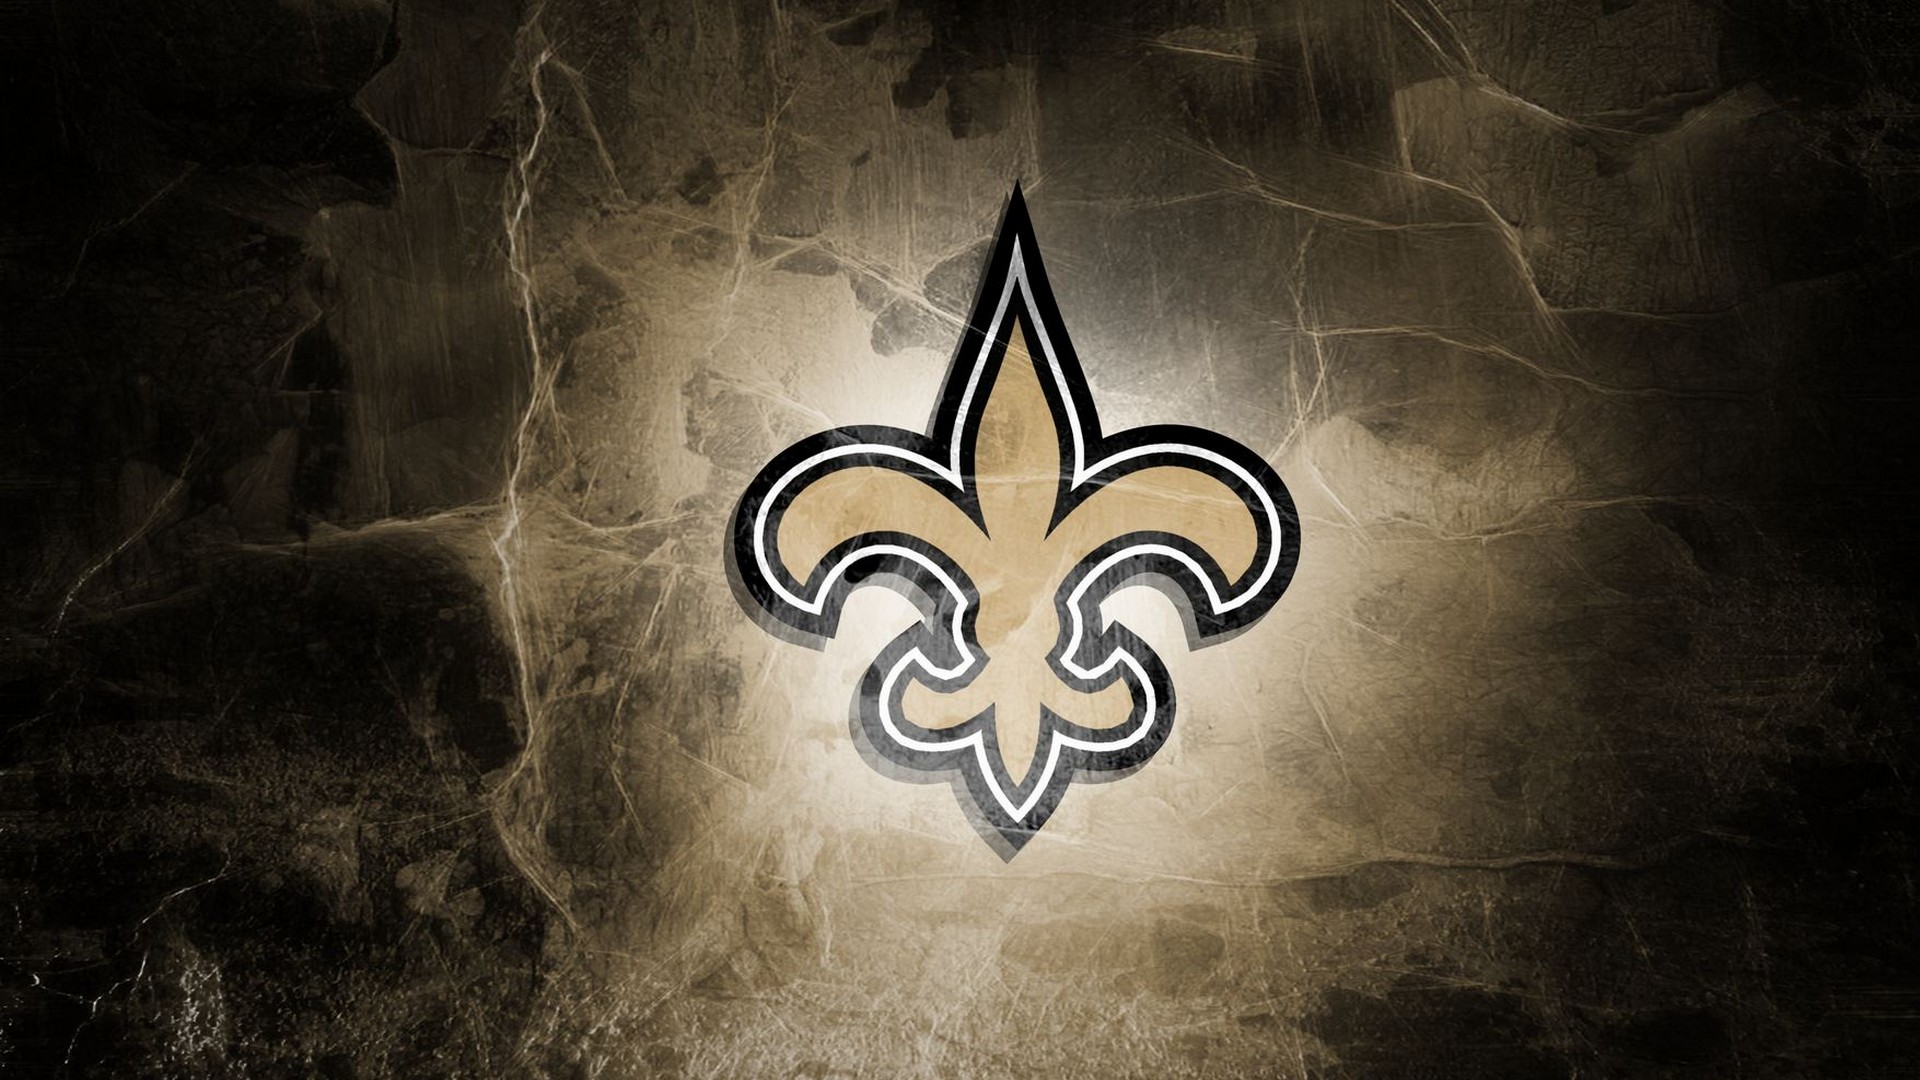 New Orleans Saints NFL For Desktop Wallpaper With Resolution 1920X1080 pixel. You can make this wallpaper for your Mac or Windows Desktop Background, iPhone, Android or Tablet and another Smartphone device for free